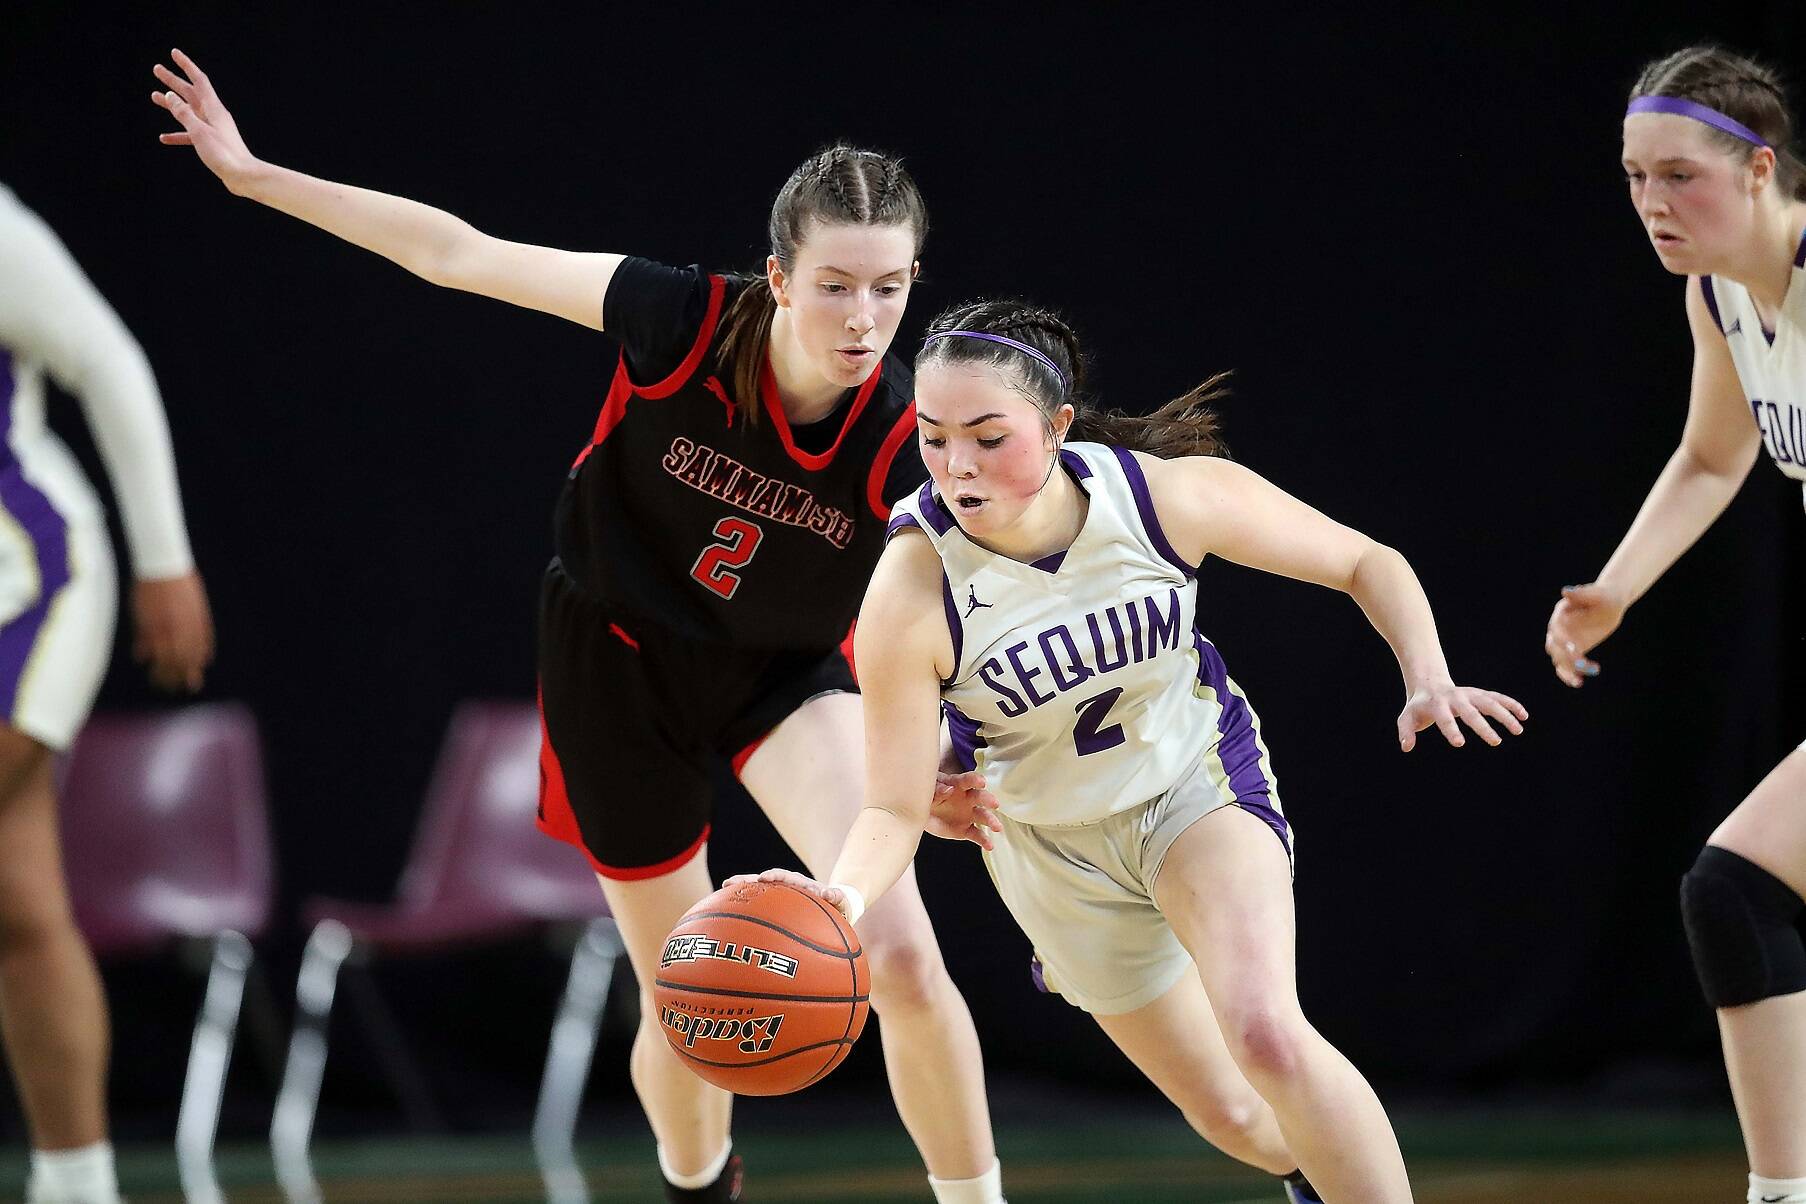 Sequim’s Hannah Bates dribbles against Sammamish Sarah Shaggs in the state 2A tournament Wednesday night. Bates finished with 14 points, seven rebounds and six steals in a 57-37 Sequim victory. (David Willoughby/for Peninsula Daily News)